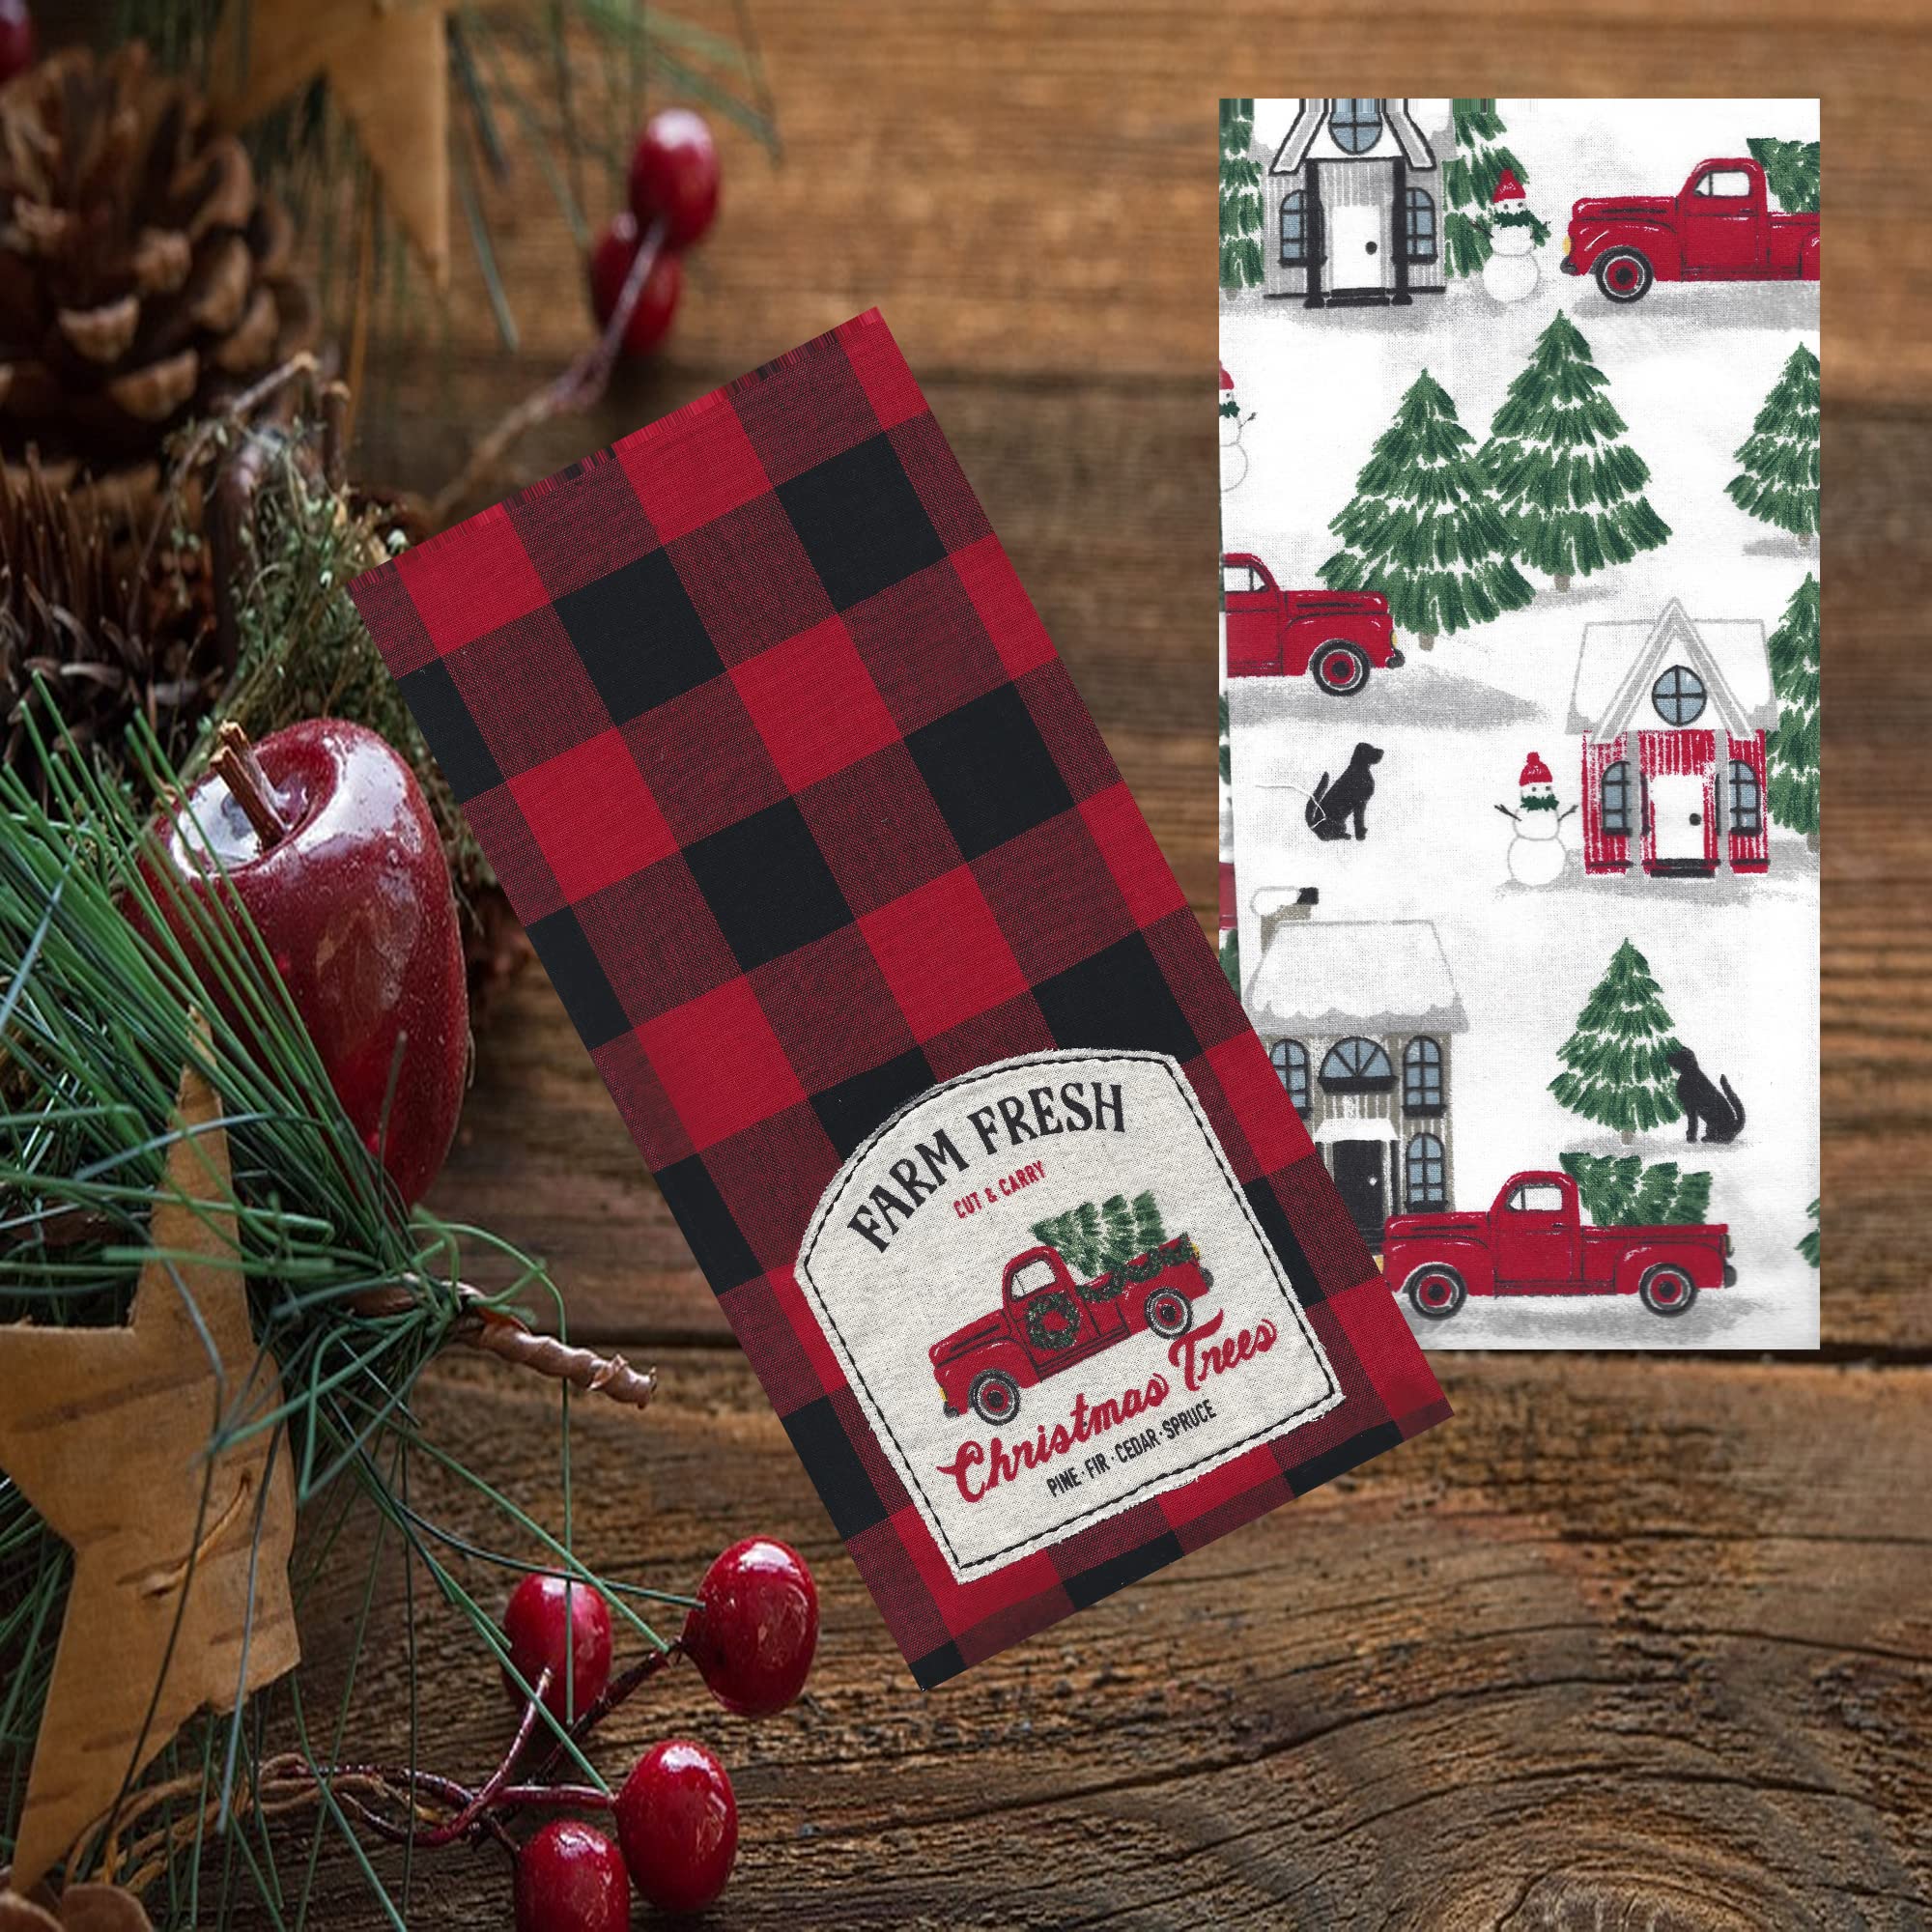 St. Nicholas Square Kitchen Hand Towels, Set of 2, Farm Fresh Christmas Trees Appliqued Embroidery Red Truck, Red and Black Buffalo Plaid Flat Cotton Dishtowels for Home Decorating